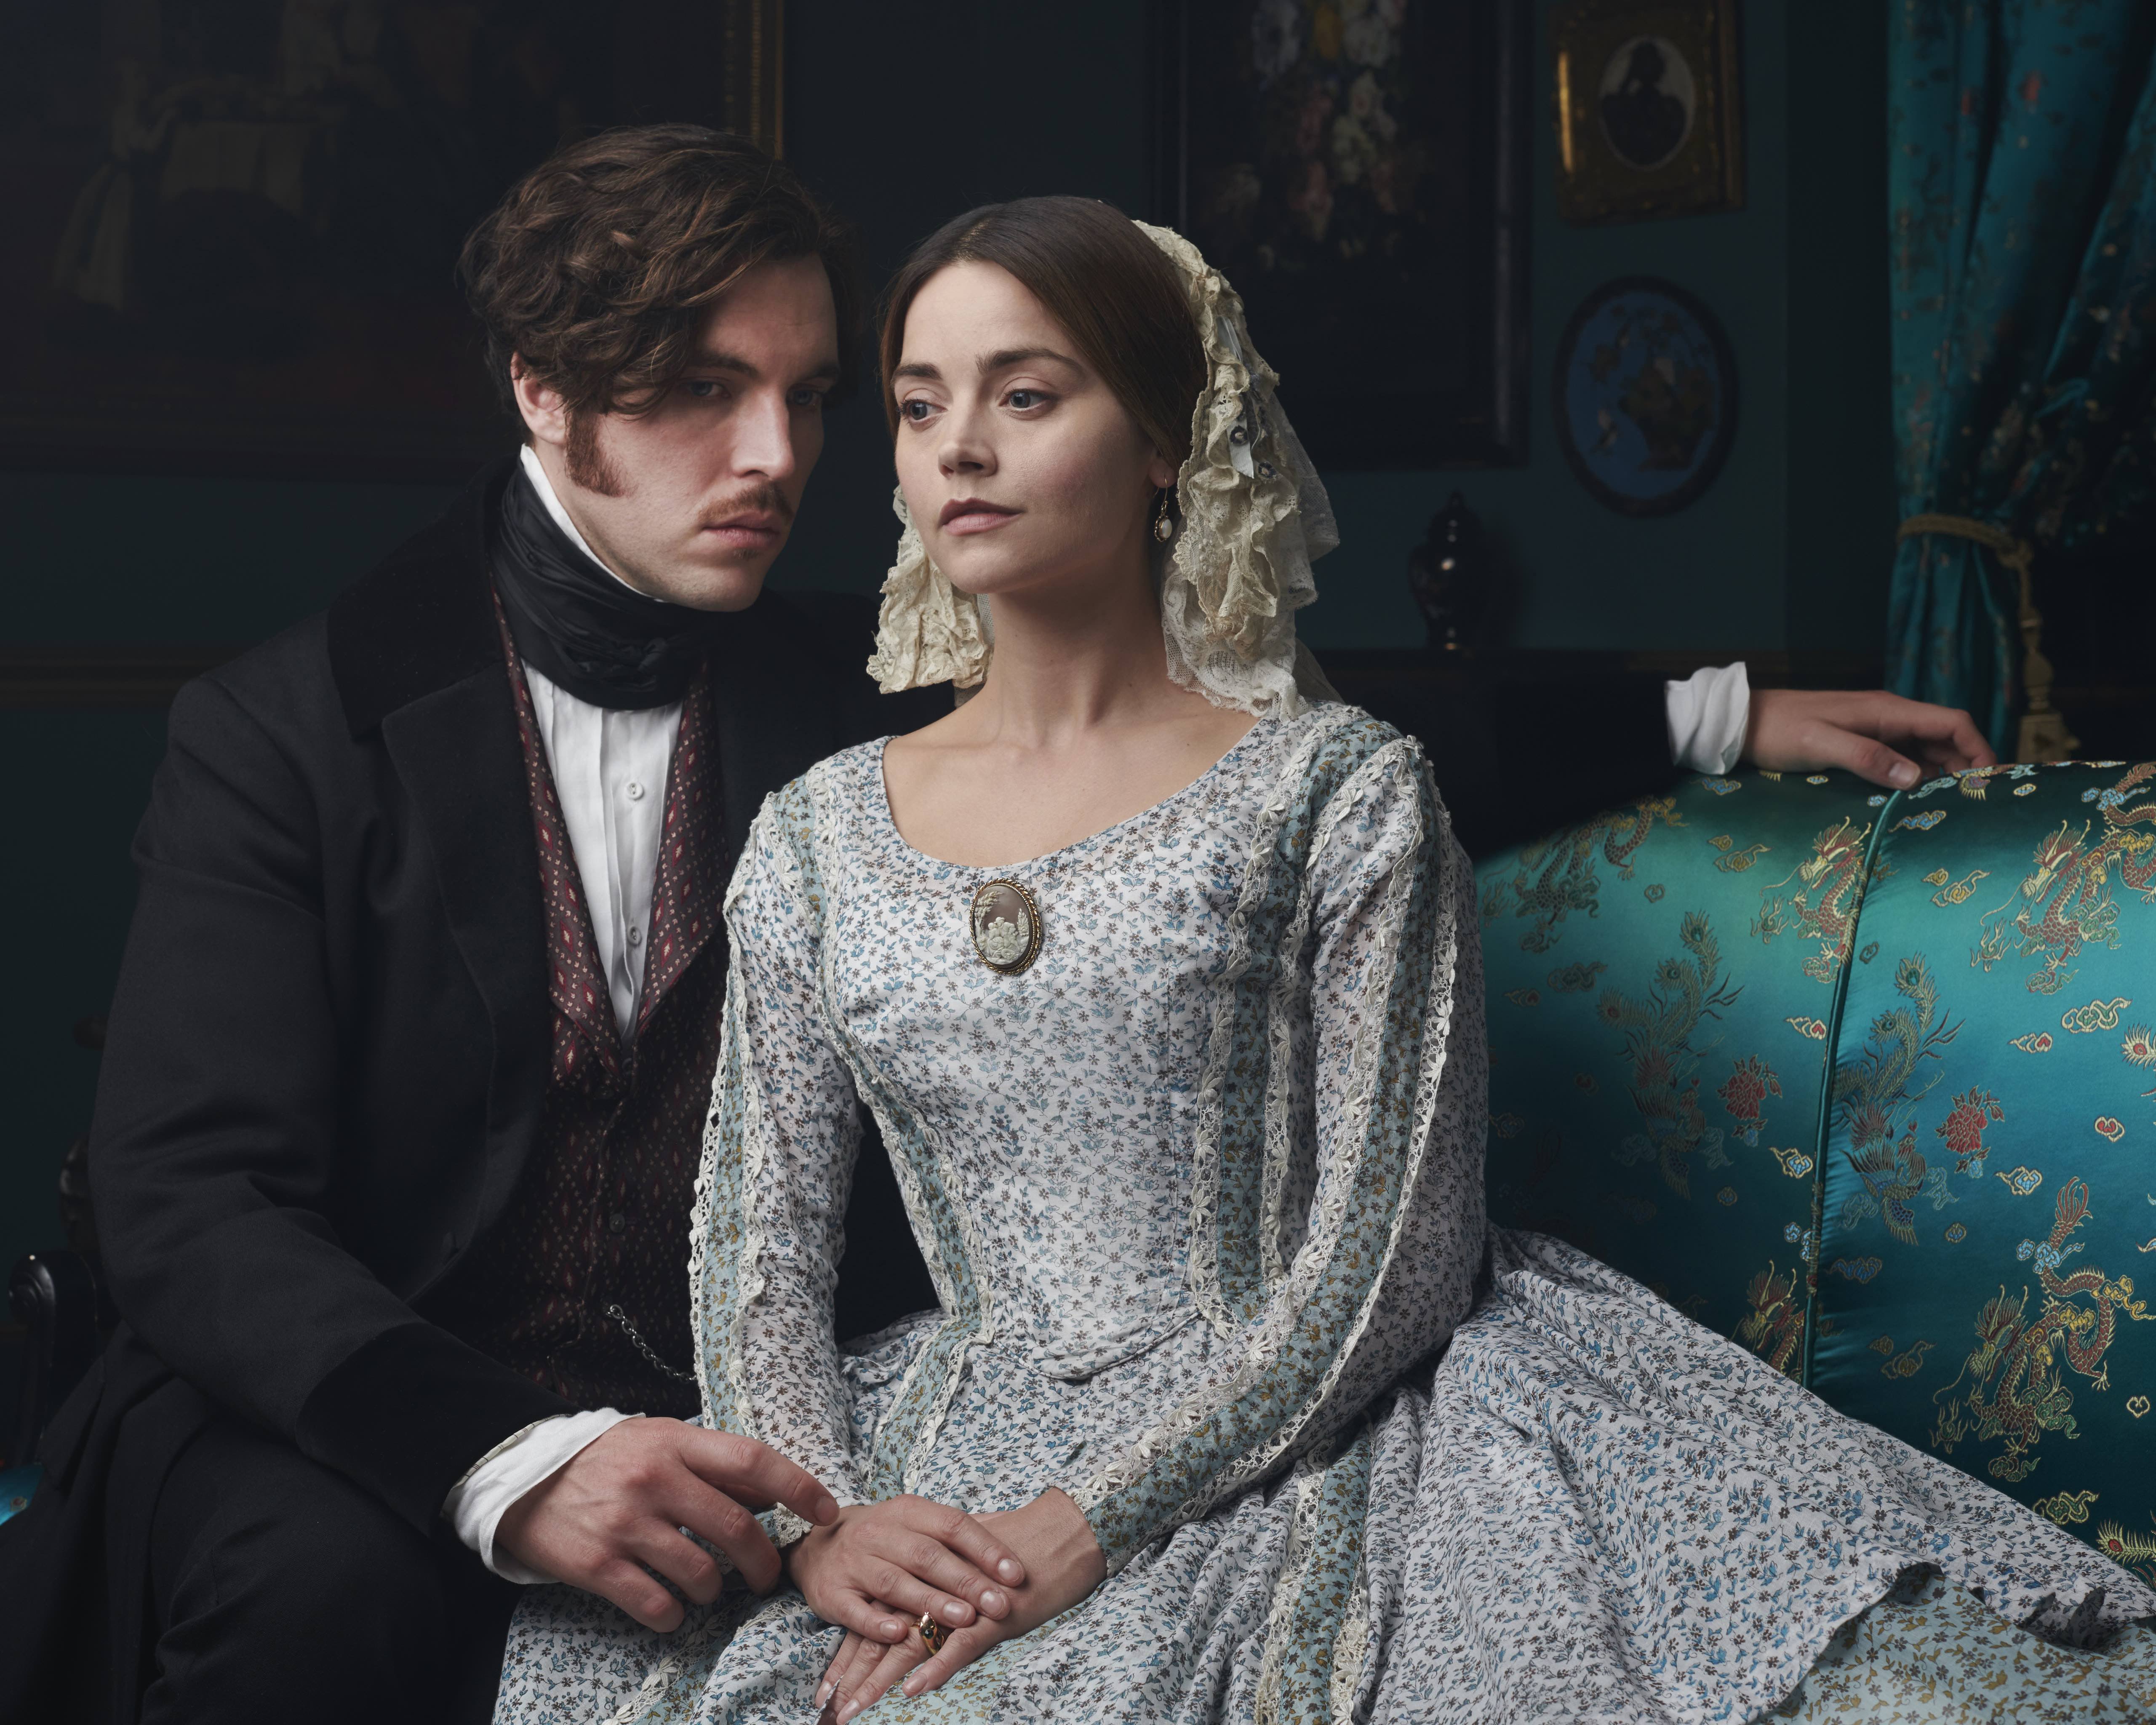 Jenna Coleman as Queen Victoria sitting next to Tom Hughes as Prince Albert in 'Victoria' 